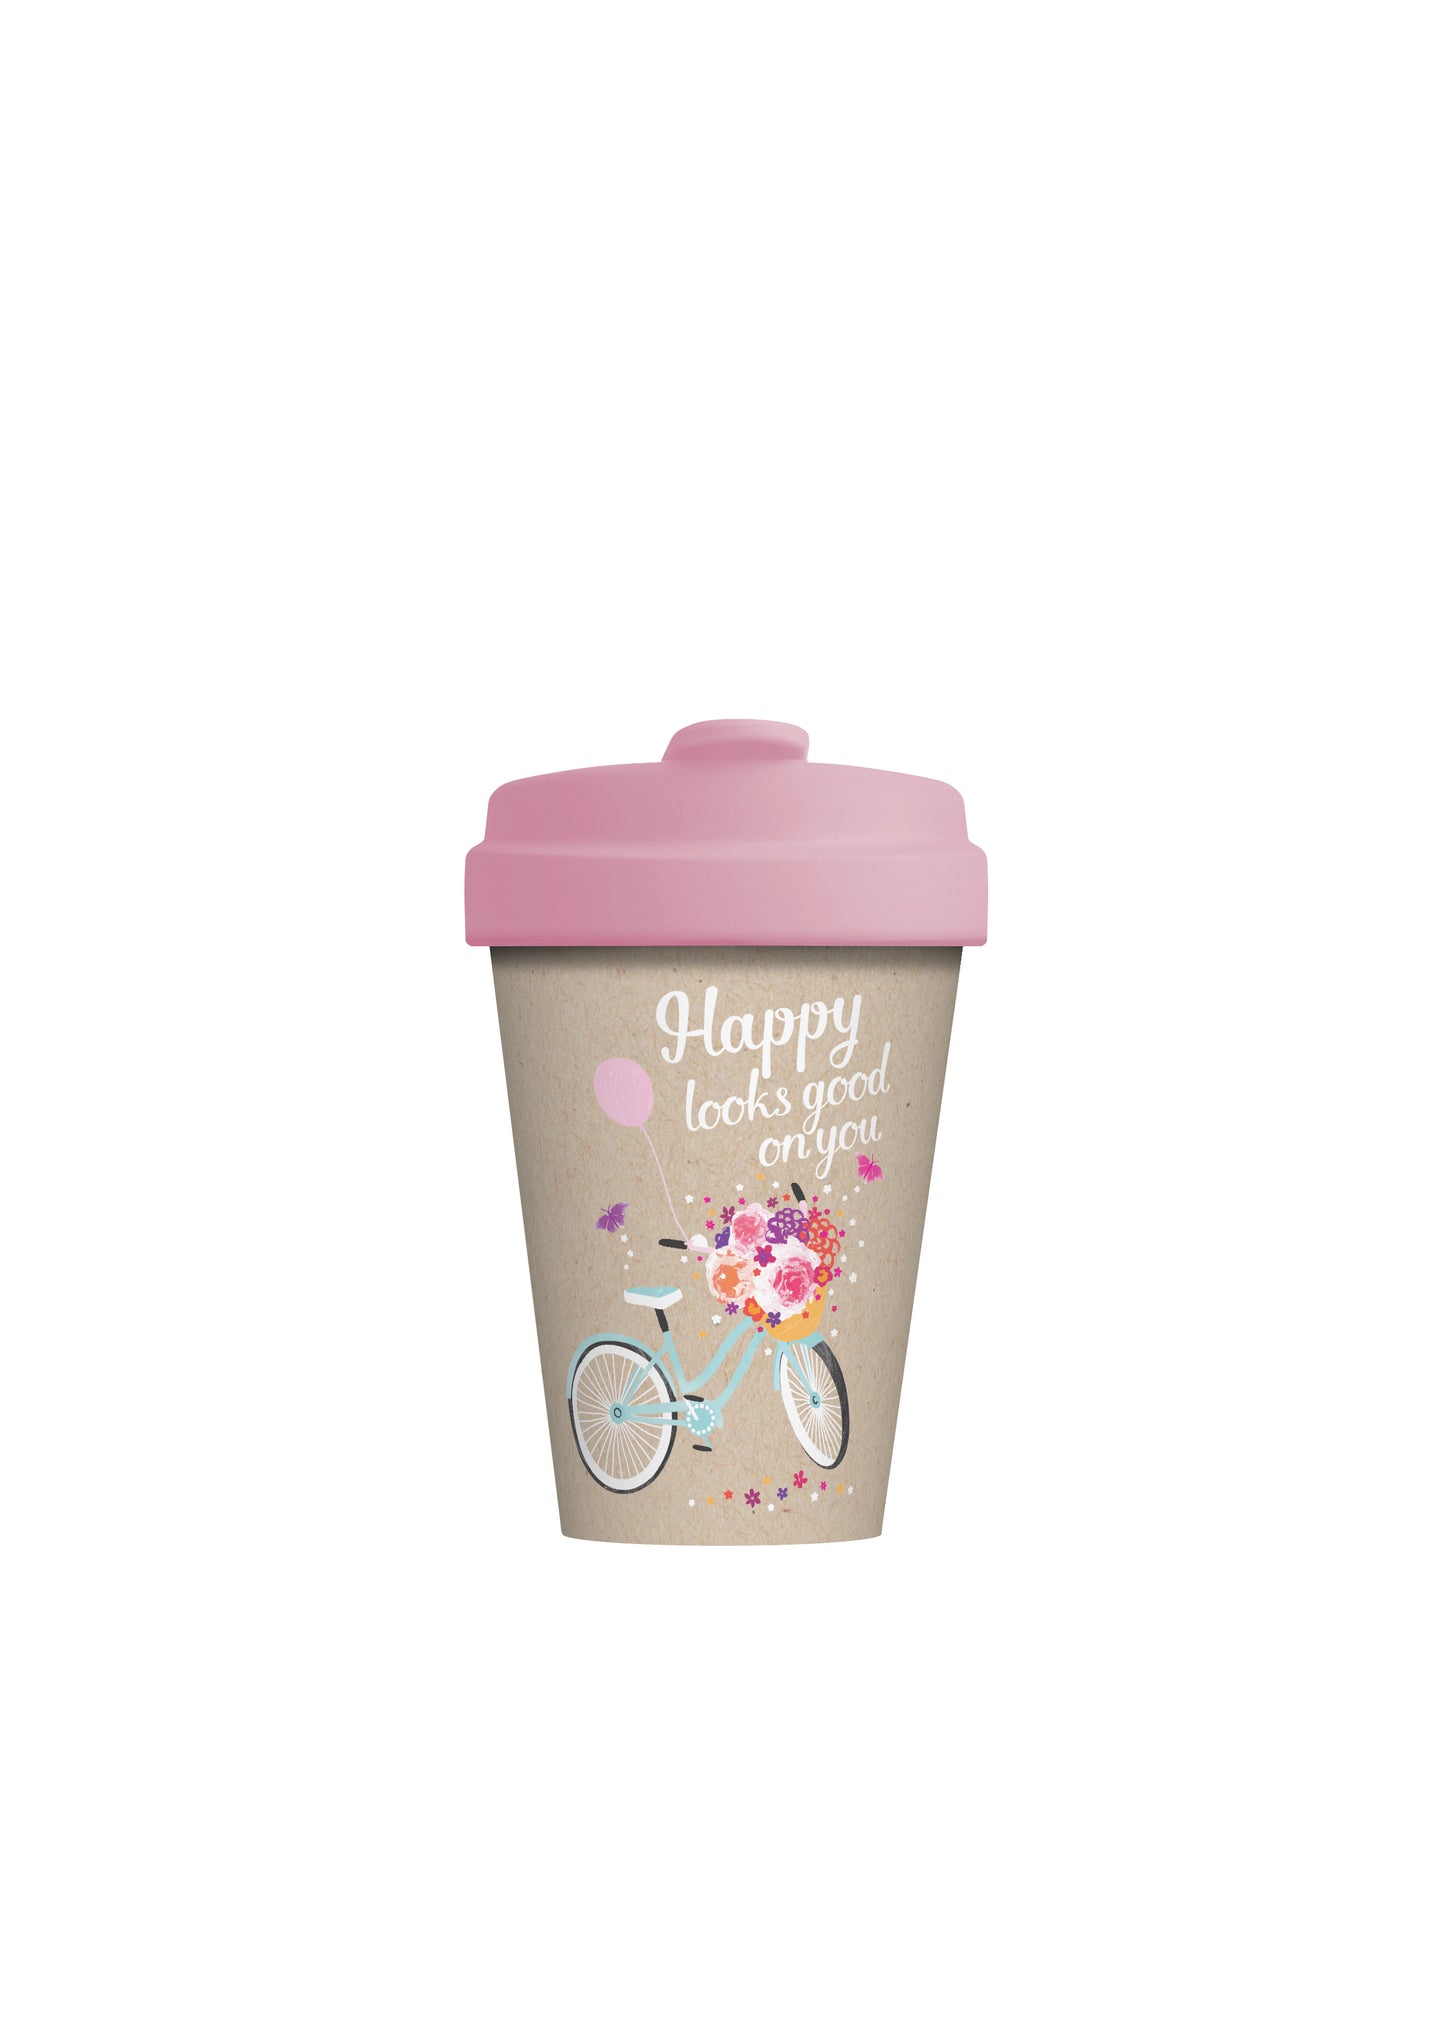 Happy Looks Good on You Bamboo Cup - Reusable, eco-friendly coffee cup - beige - pink lid - bicycle - flowers